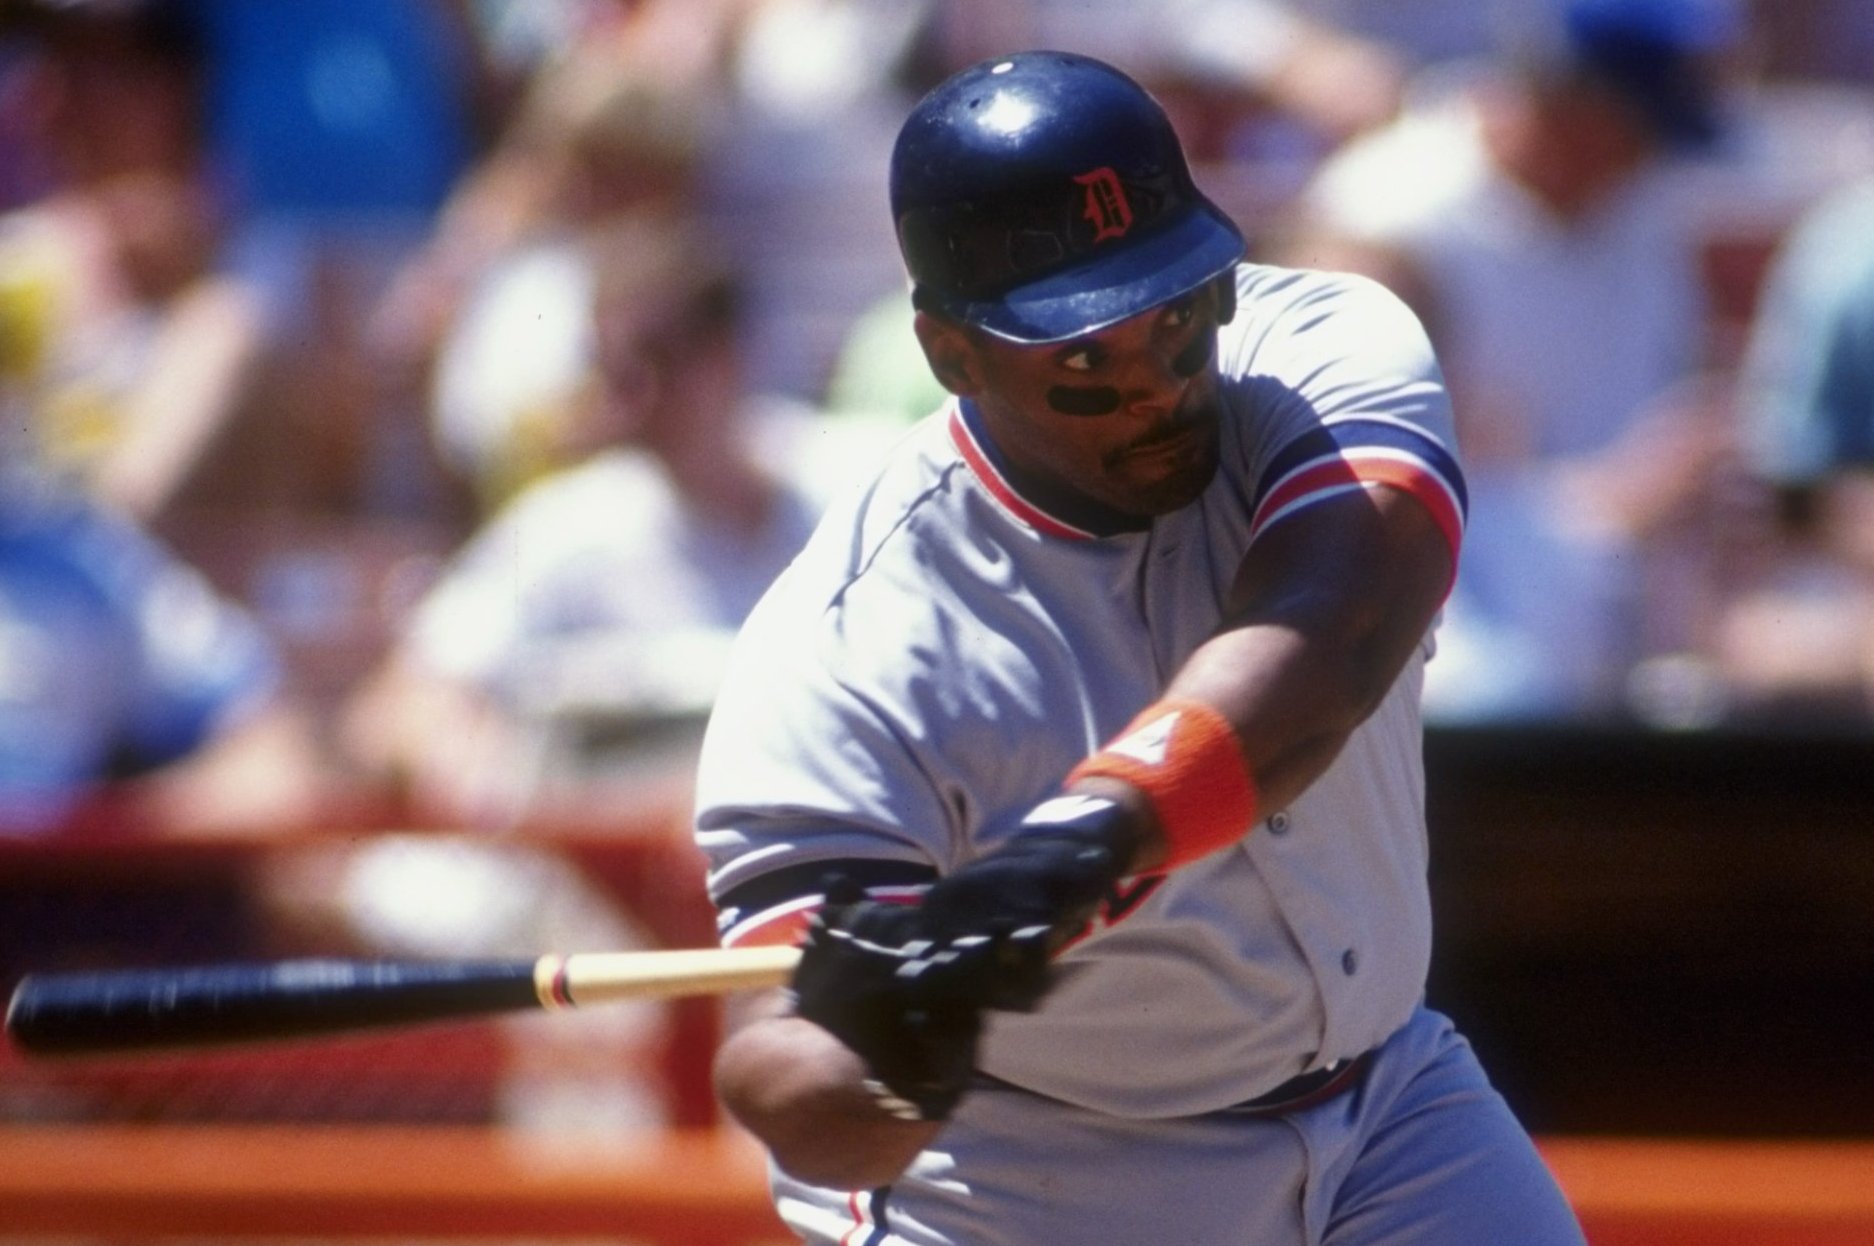 Cecil Fielder, former Tigers star, surprised that his son, Prince